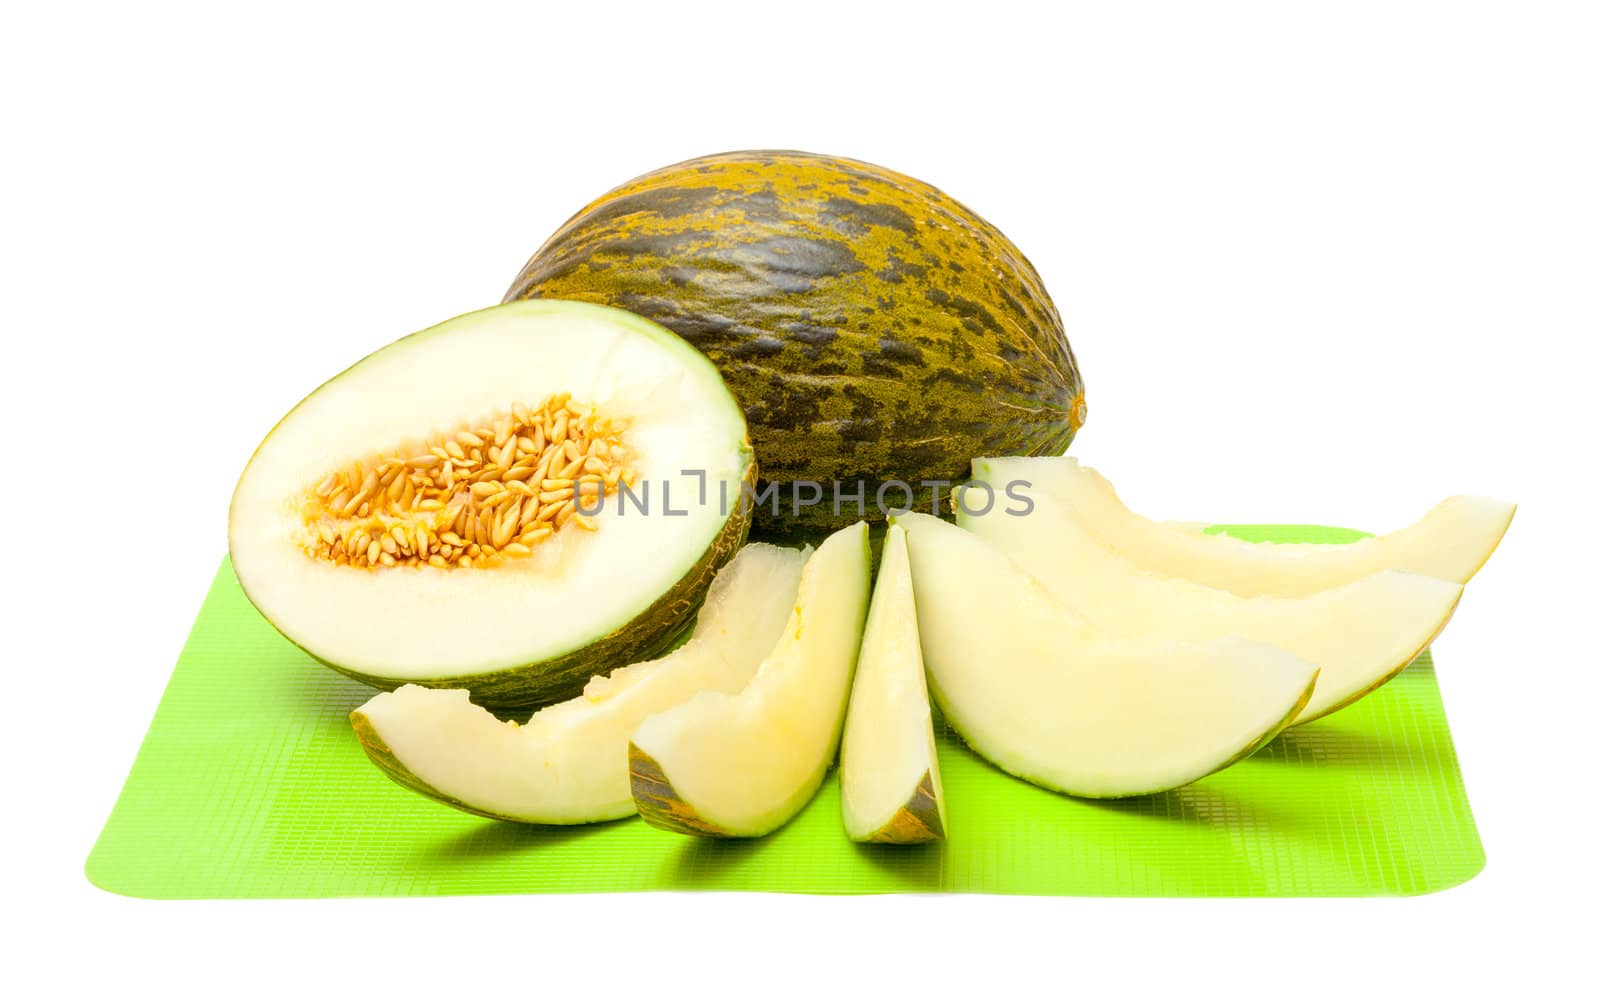 Green Melon with Slices, on white background